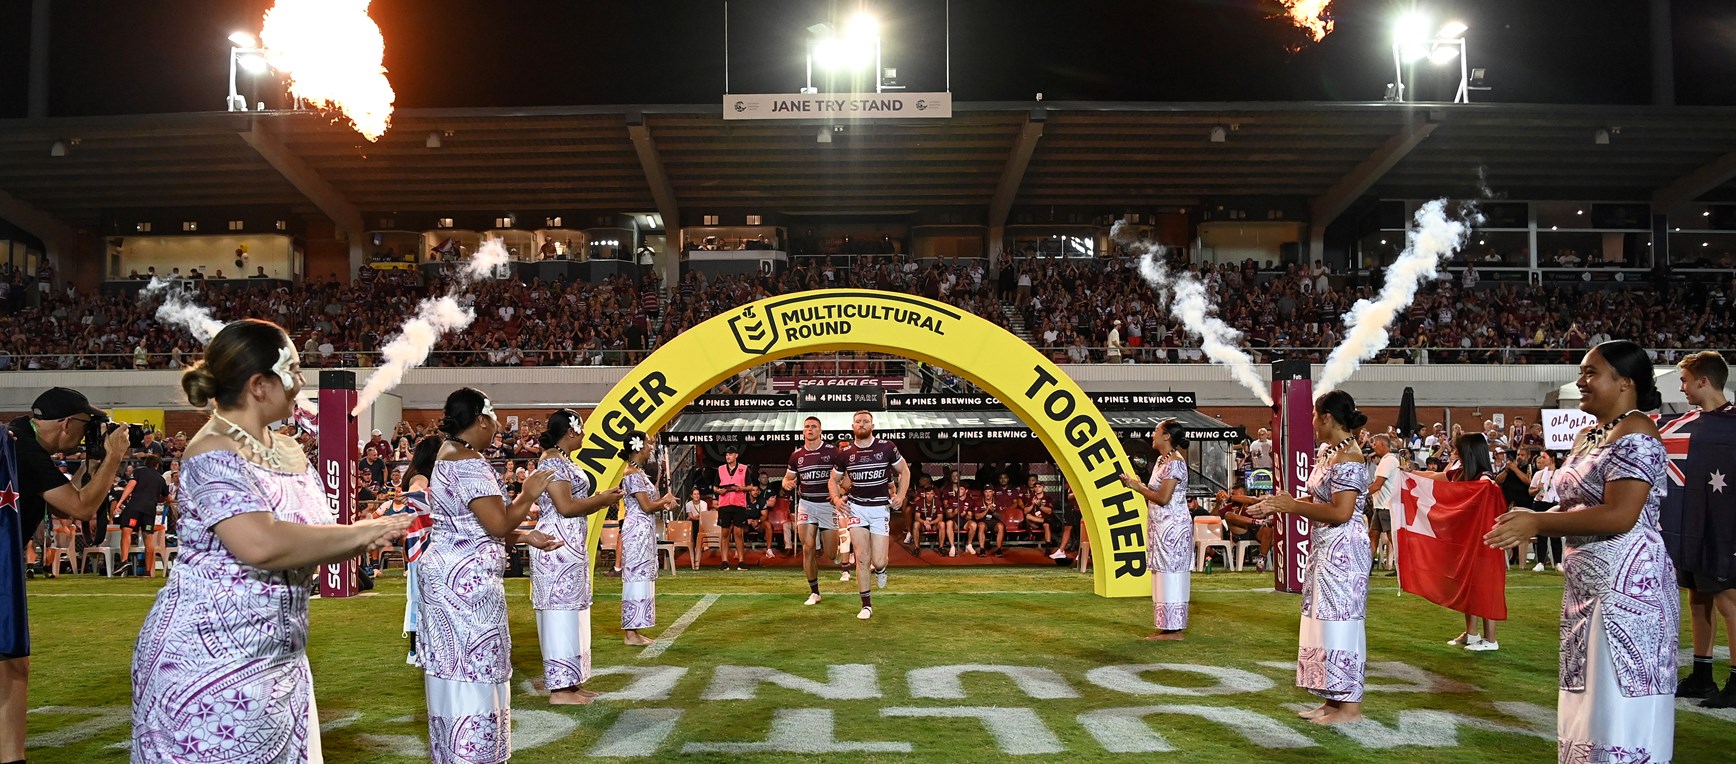 Sea Eagles kick off NRL Multicultural Round in fine style